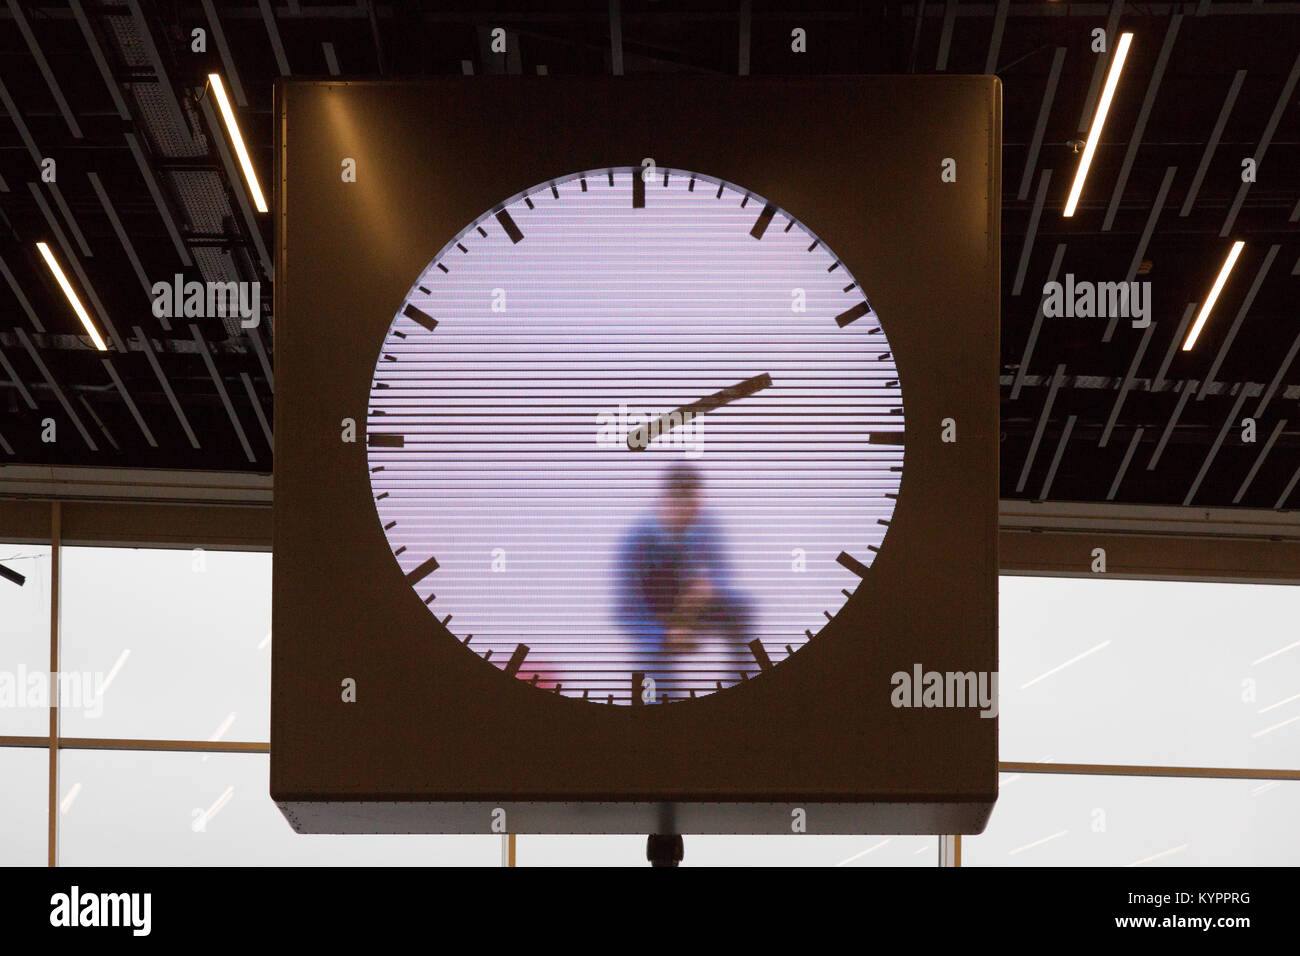 The Schiphol airport Real Time Schiphol Clock, by Maarten Baas, an art clock in the terminal, Amsterdam airport Schiphol, Netherlands, Europe Stock Photo